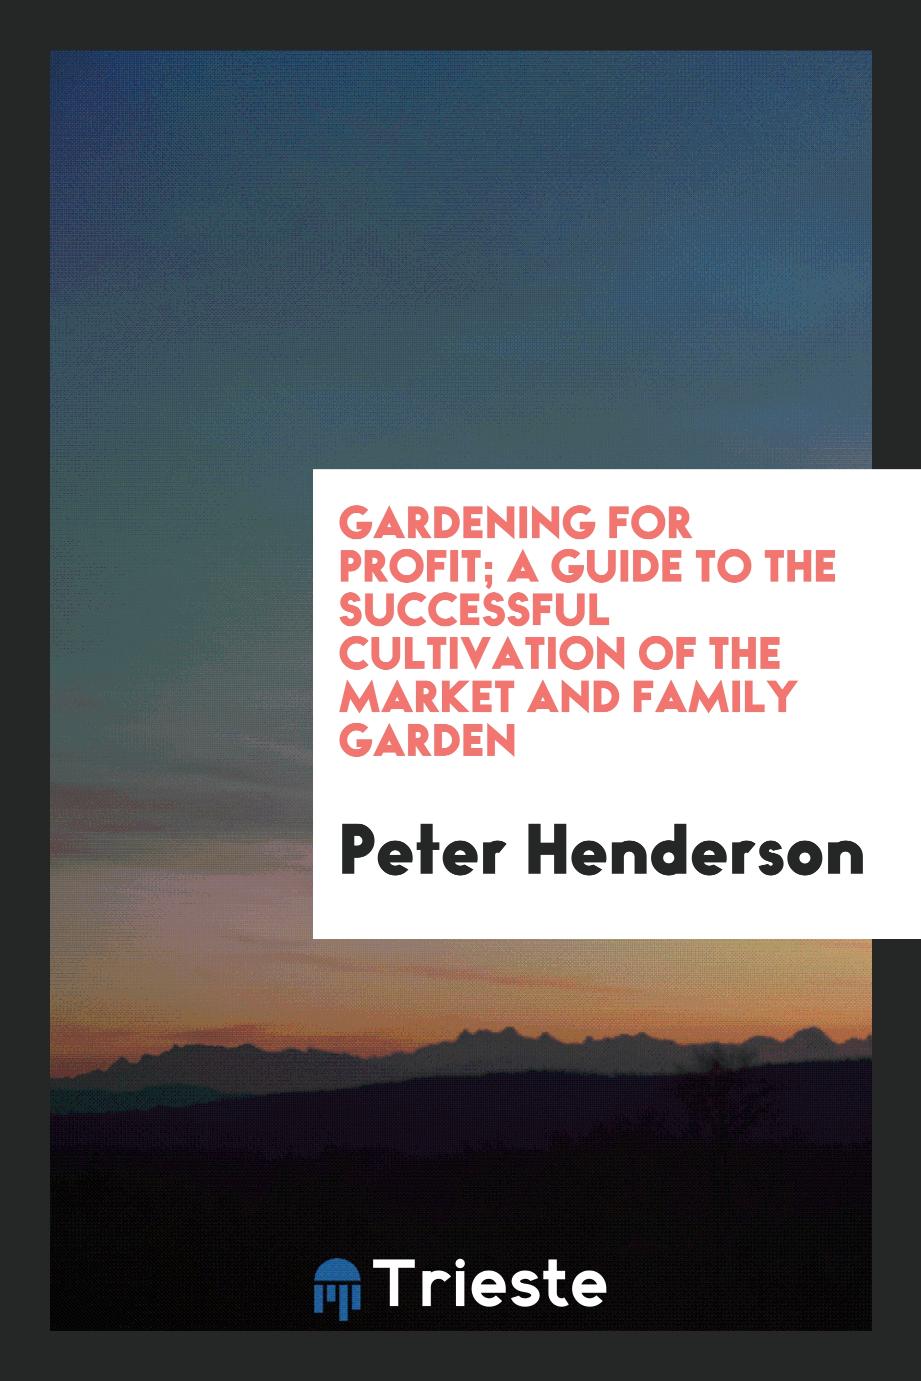 Gardening for profit; a guide to the successful cultivation of the market and family garden